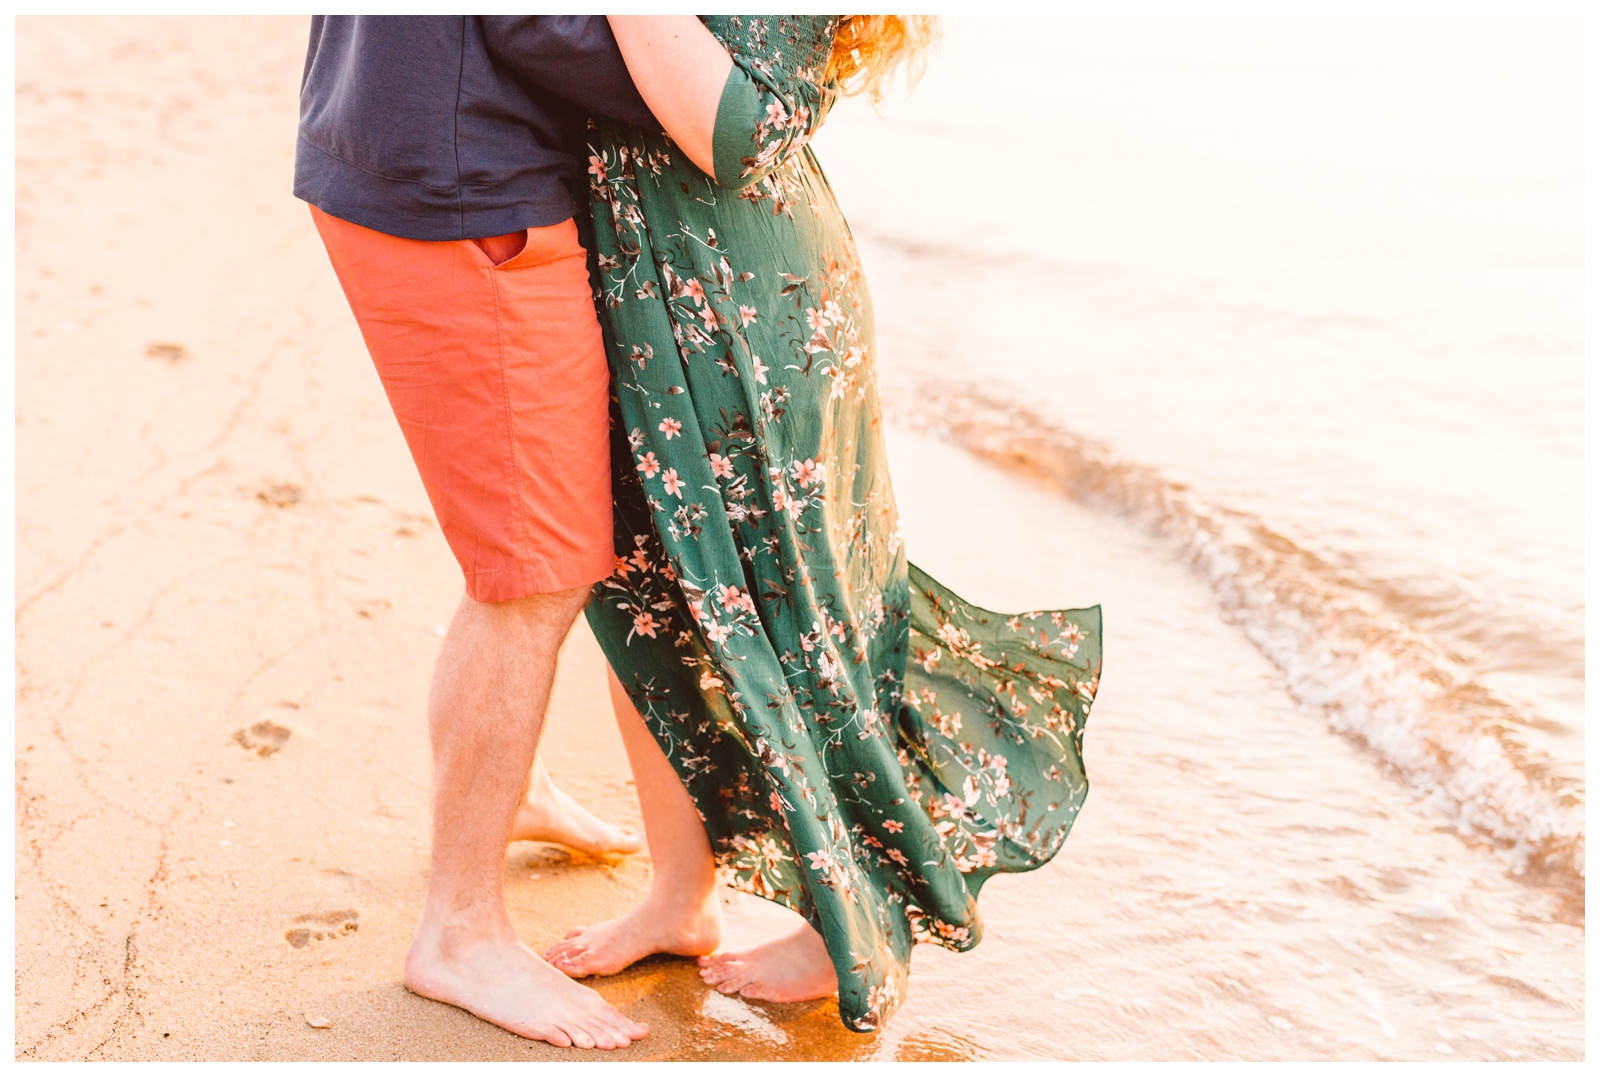 Golden Hour Beach Engagement Session Inspiration - St.Michaels, Maryland -Brooke Michelle Photography